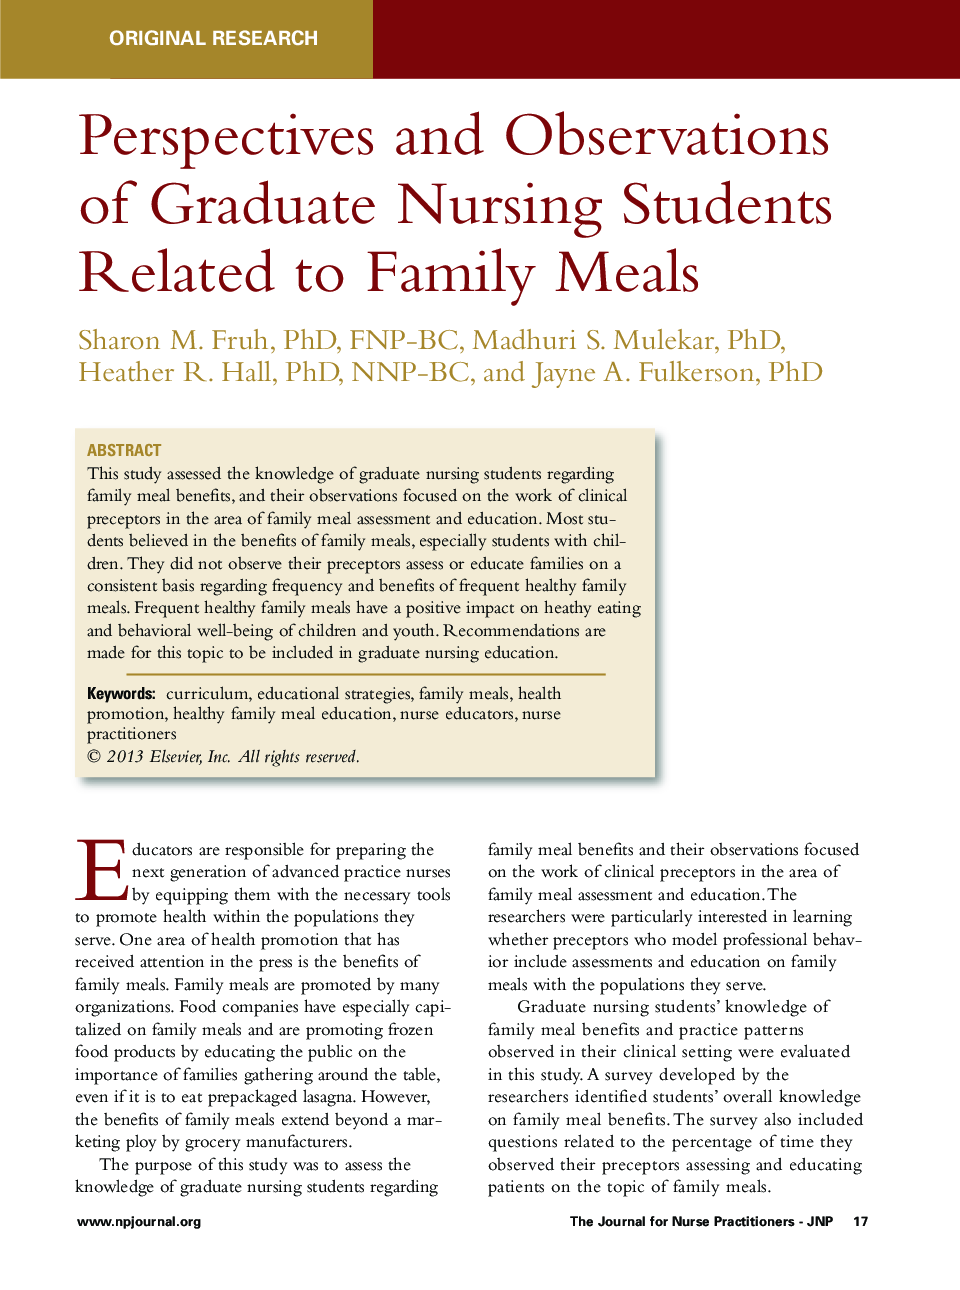 Perspectives and Observations of Graduate Nursing Students Related to Family Meals 